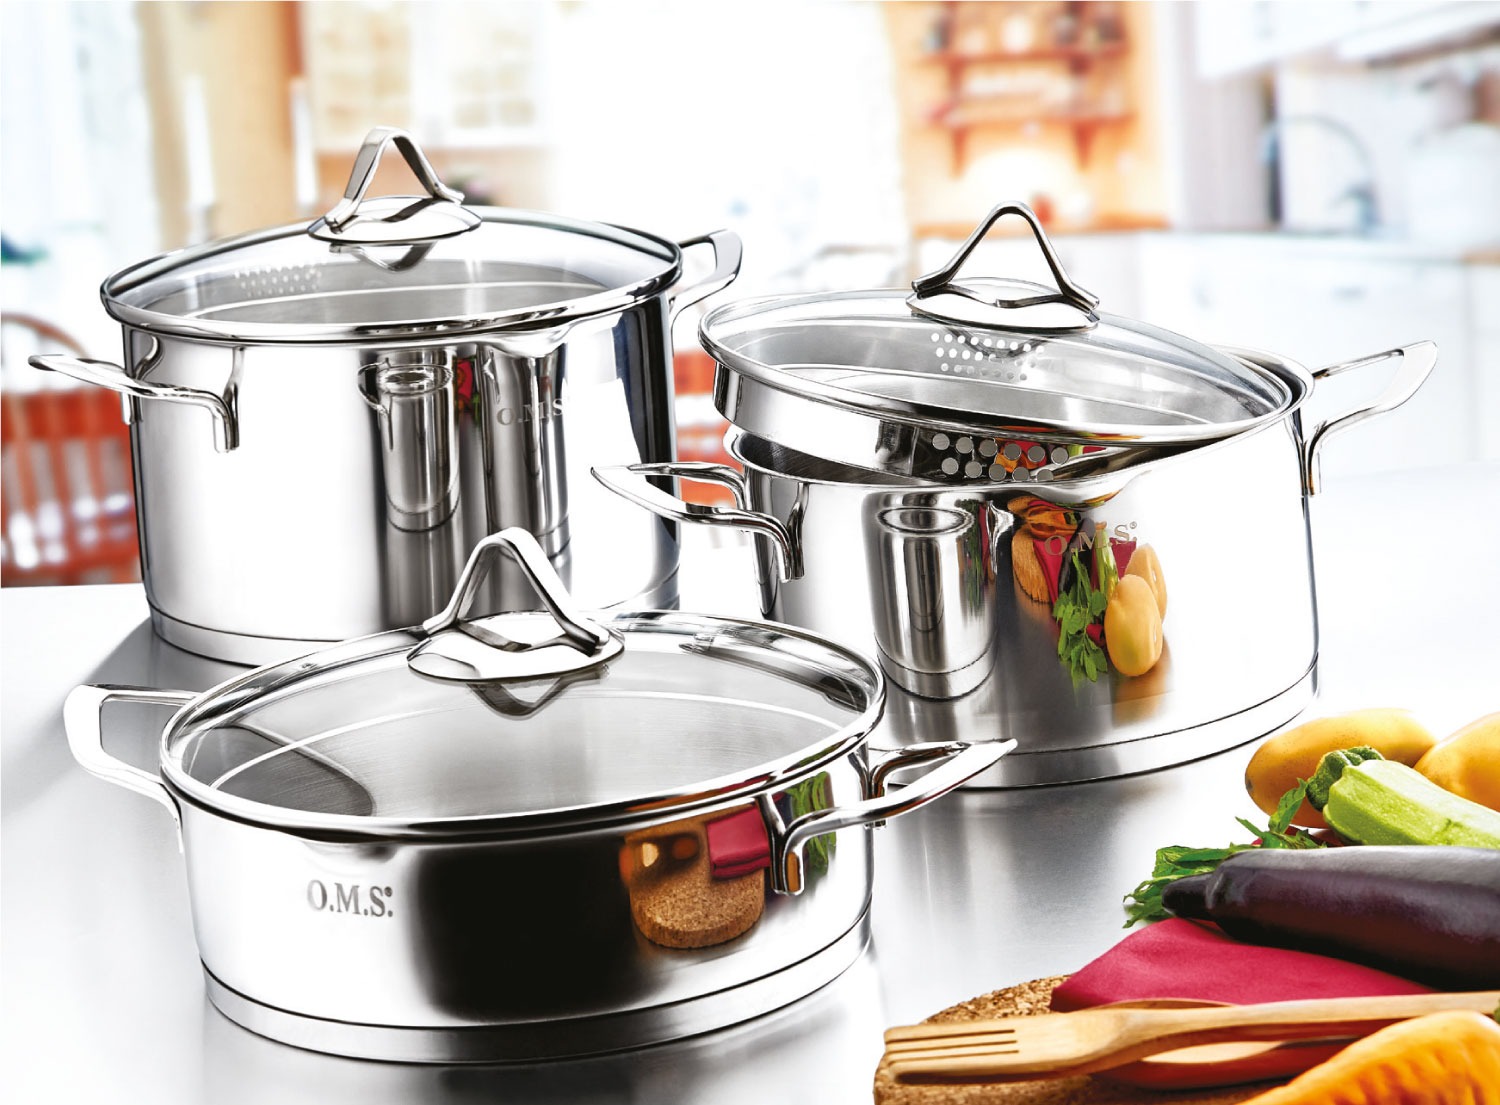 OMS Cookware 6 Piece Large Pan Sets – New Wholesale Stock